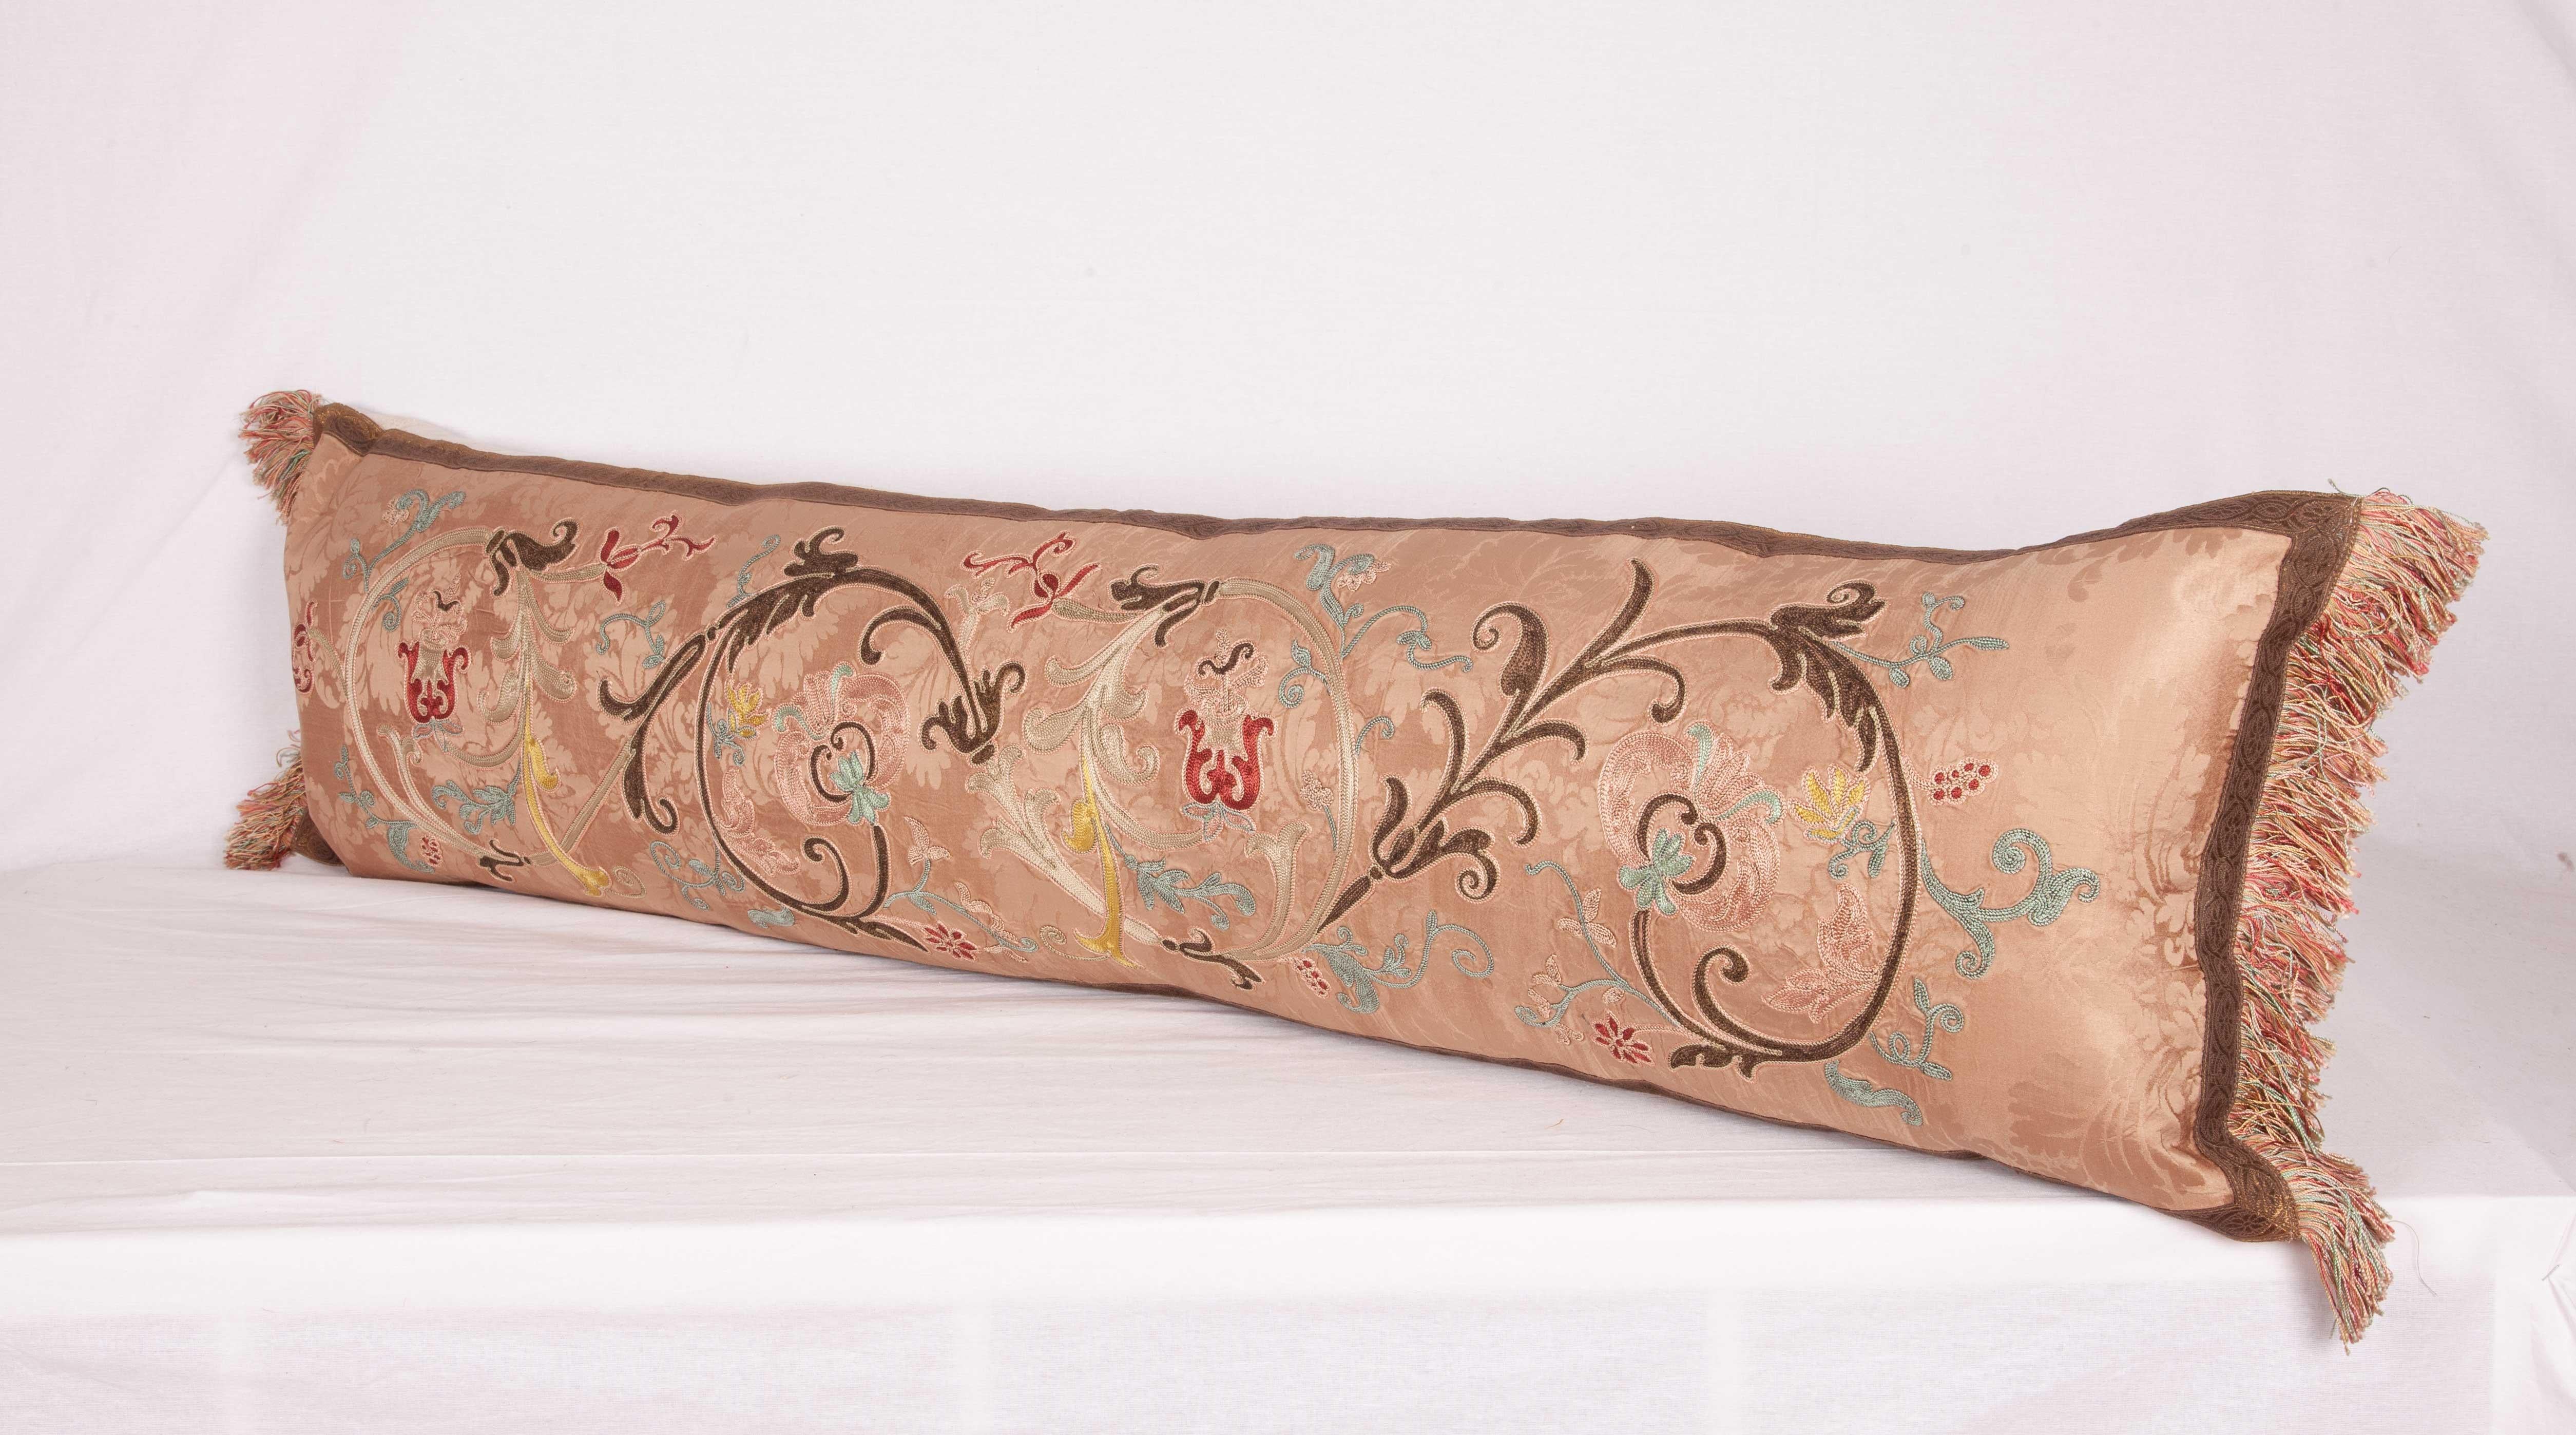 Silk Long Pillow Case Fashioned from a European Embroidery, Late 19th Century